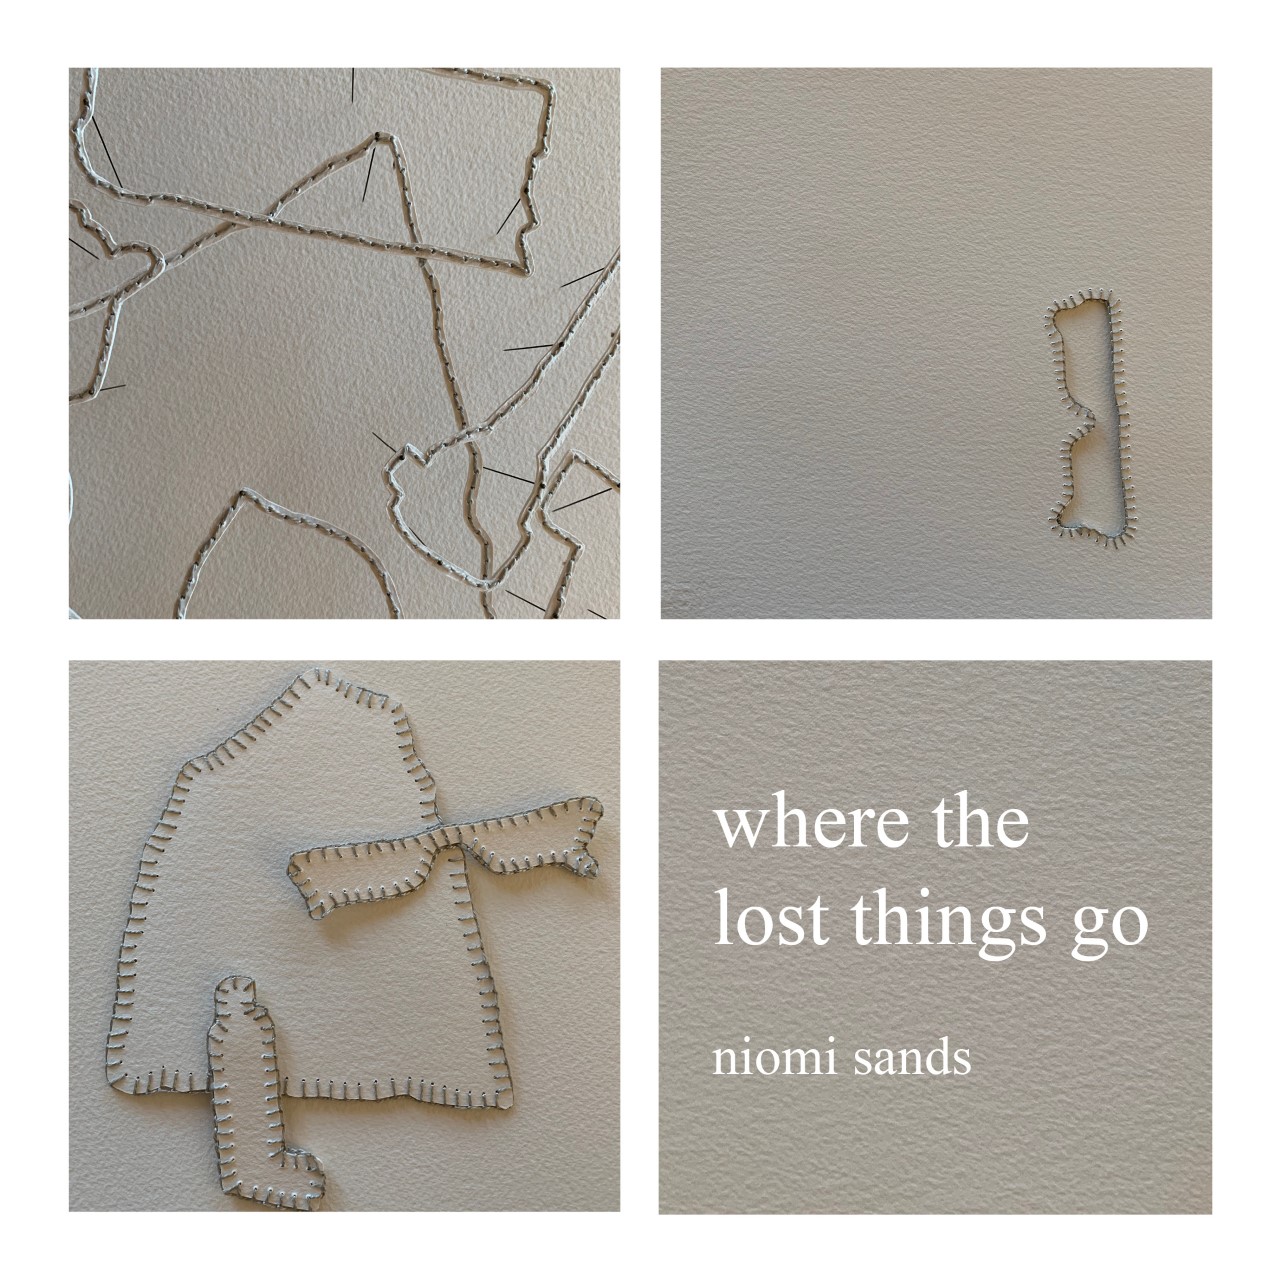 Where the Lost Things Go, Niomi Sands